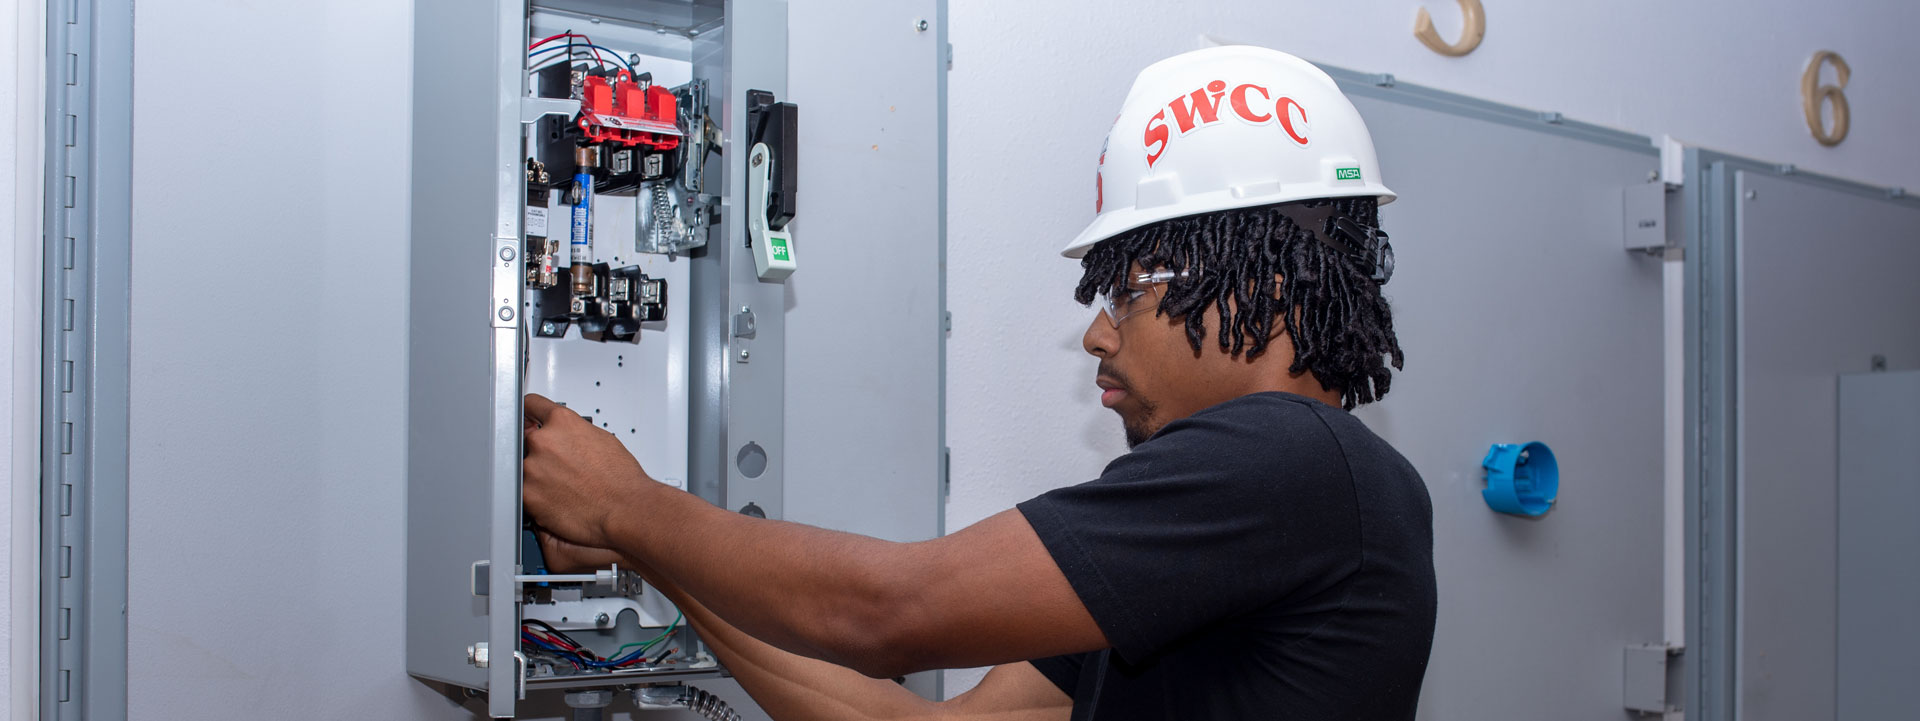 Student working in an electrical service box